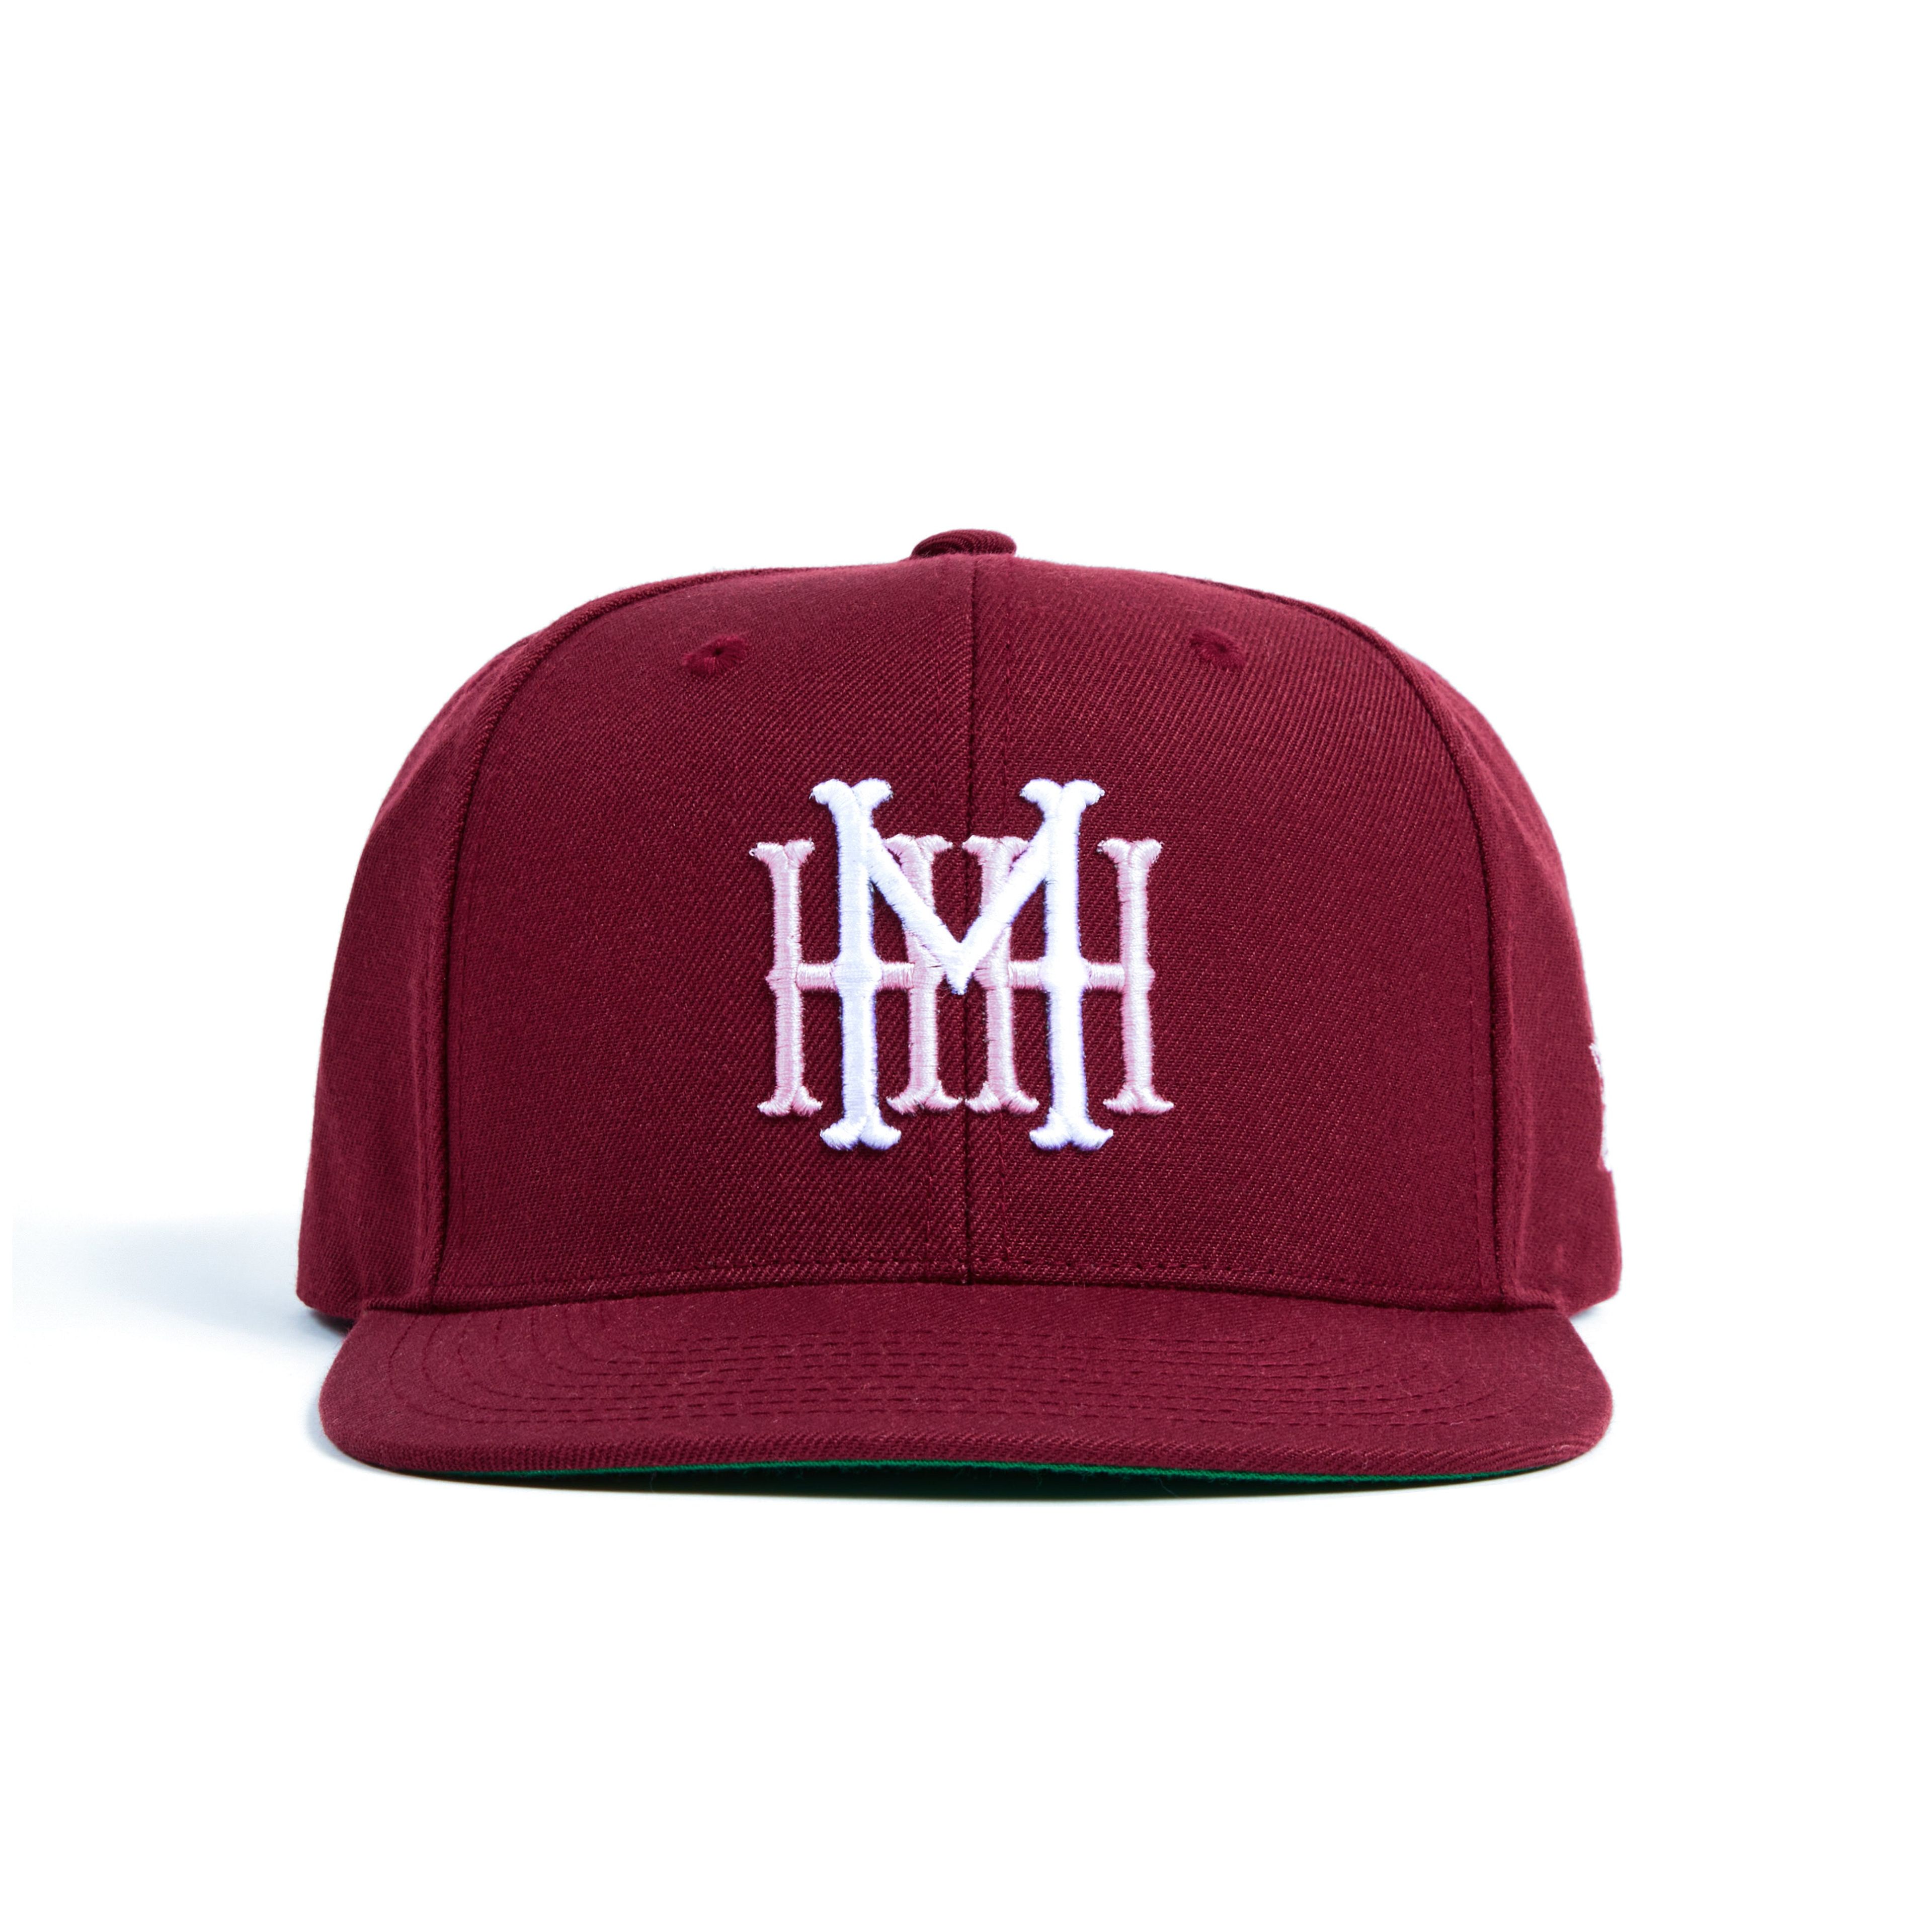 www.mikeshothoney.com/products/mhh-heritage-snapback-hat